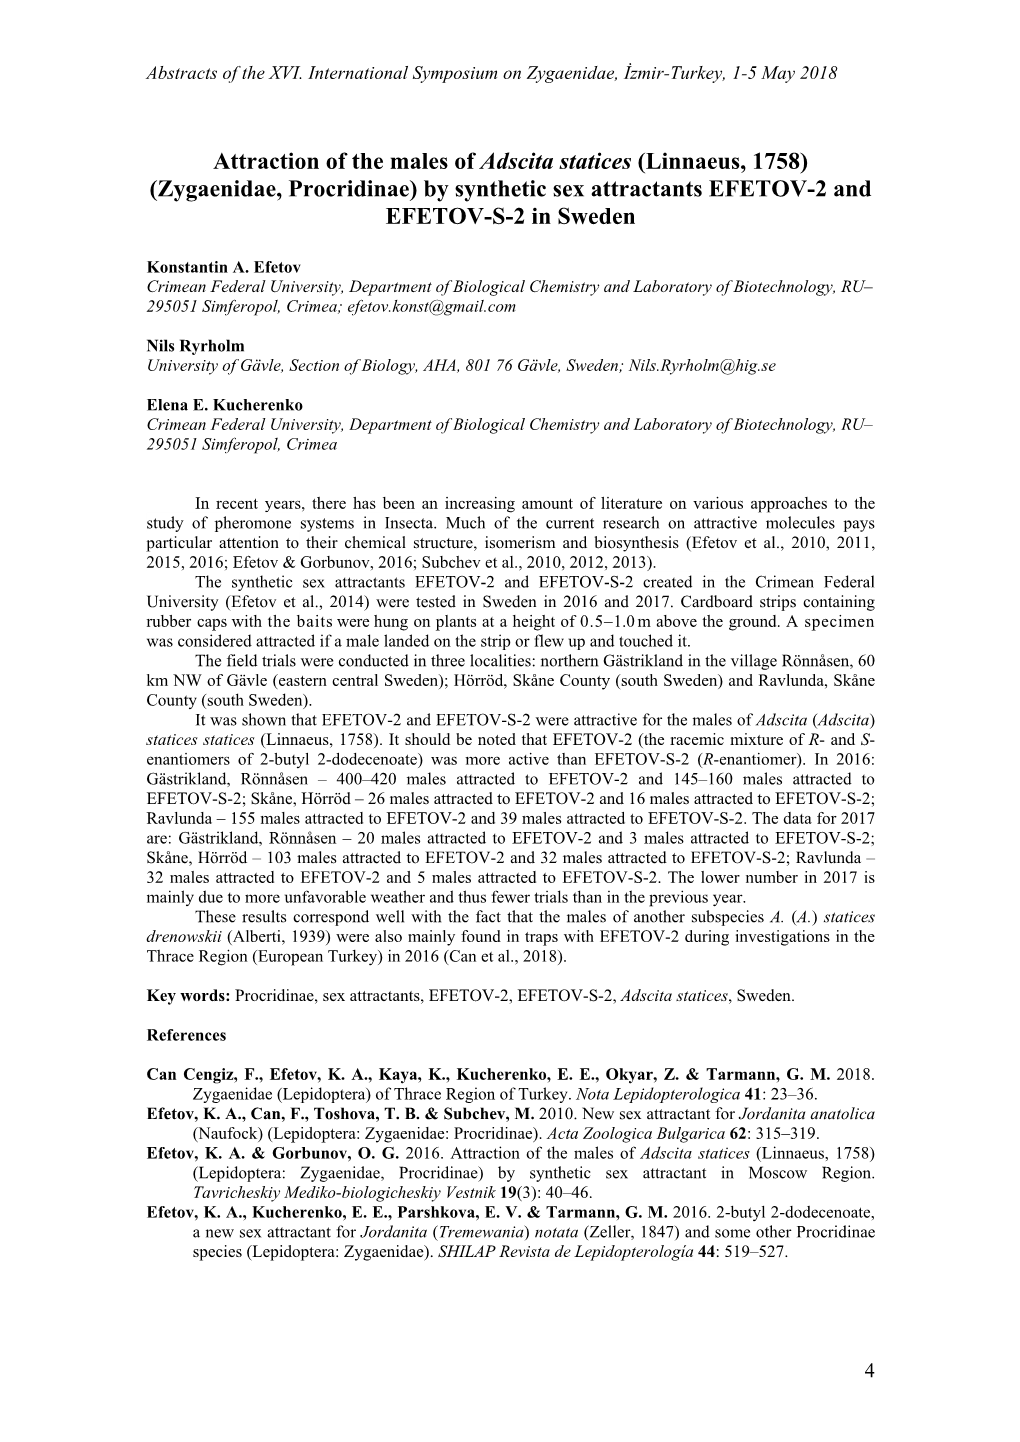 Attraction of the Males of Adscita Statices (Linnaeus, 1758) (Zygaenidae, Procridinae) by Synthetic Sex Attractants EFETOV-2 and EFETOV-S-2 in Sweden